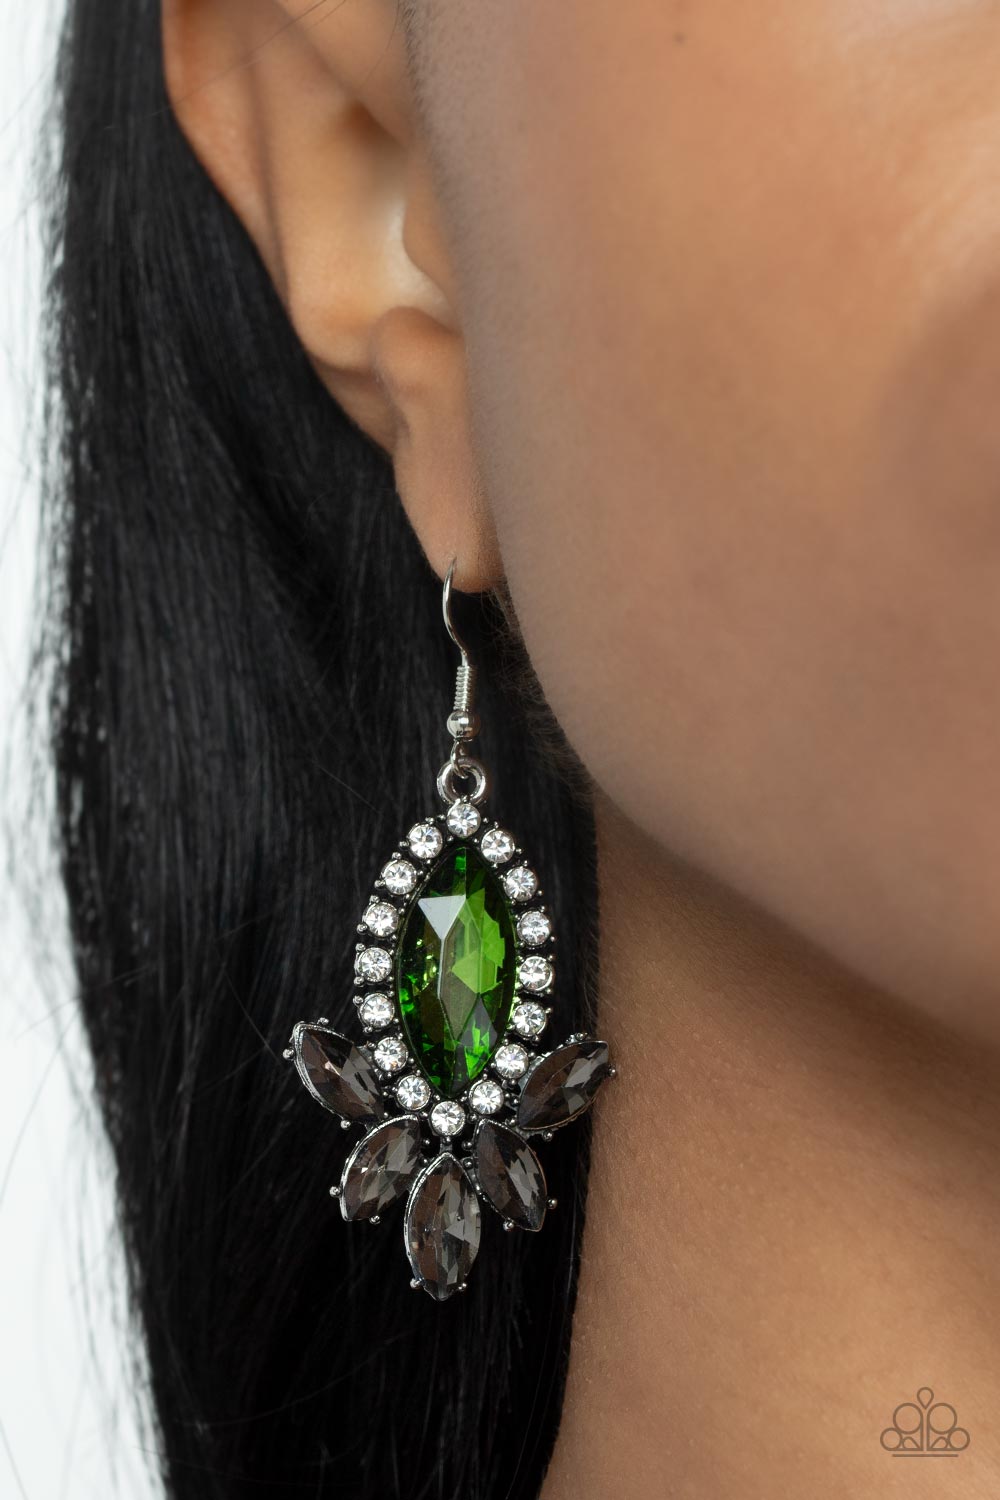 A fan of smoky marquise cut rhinestones flares out from the bottom of an oversized green marquise cut rhinestone that is bordered in dainty white rhinestones, resulting in a dramatically dazzling display. Earring attaches to a standard fishhook fitting.  Sold as one pair of earrings.